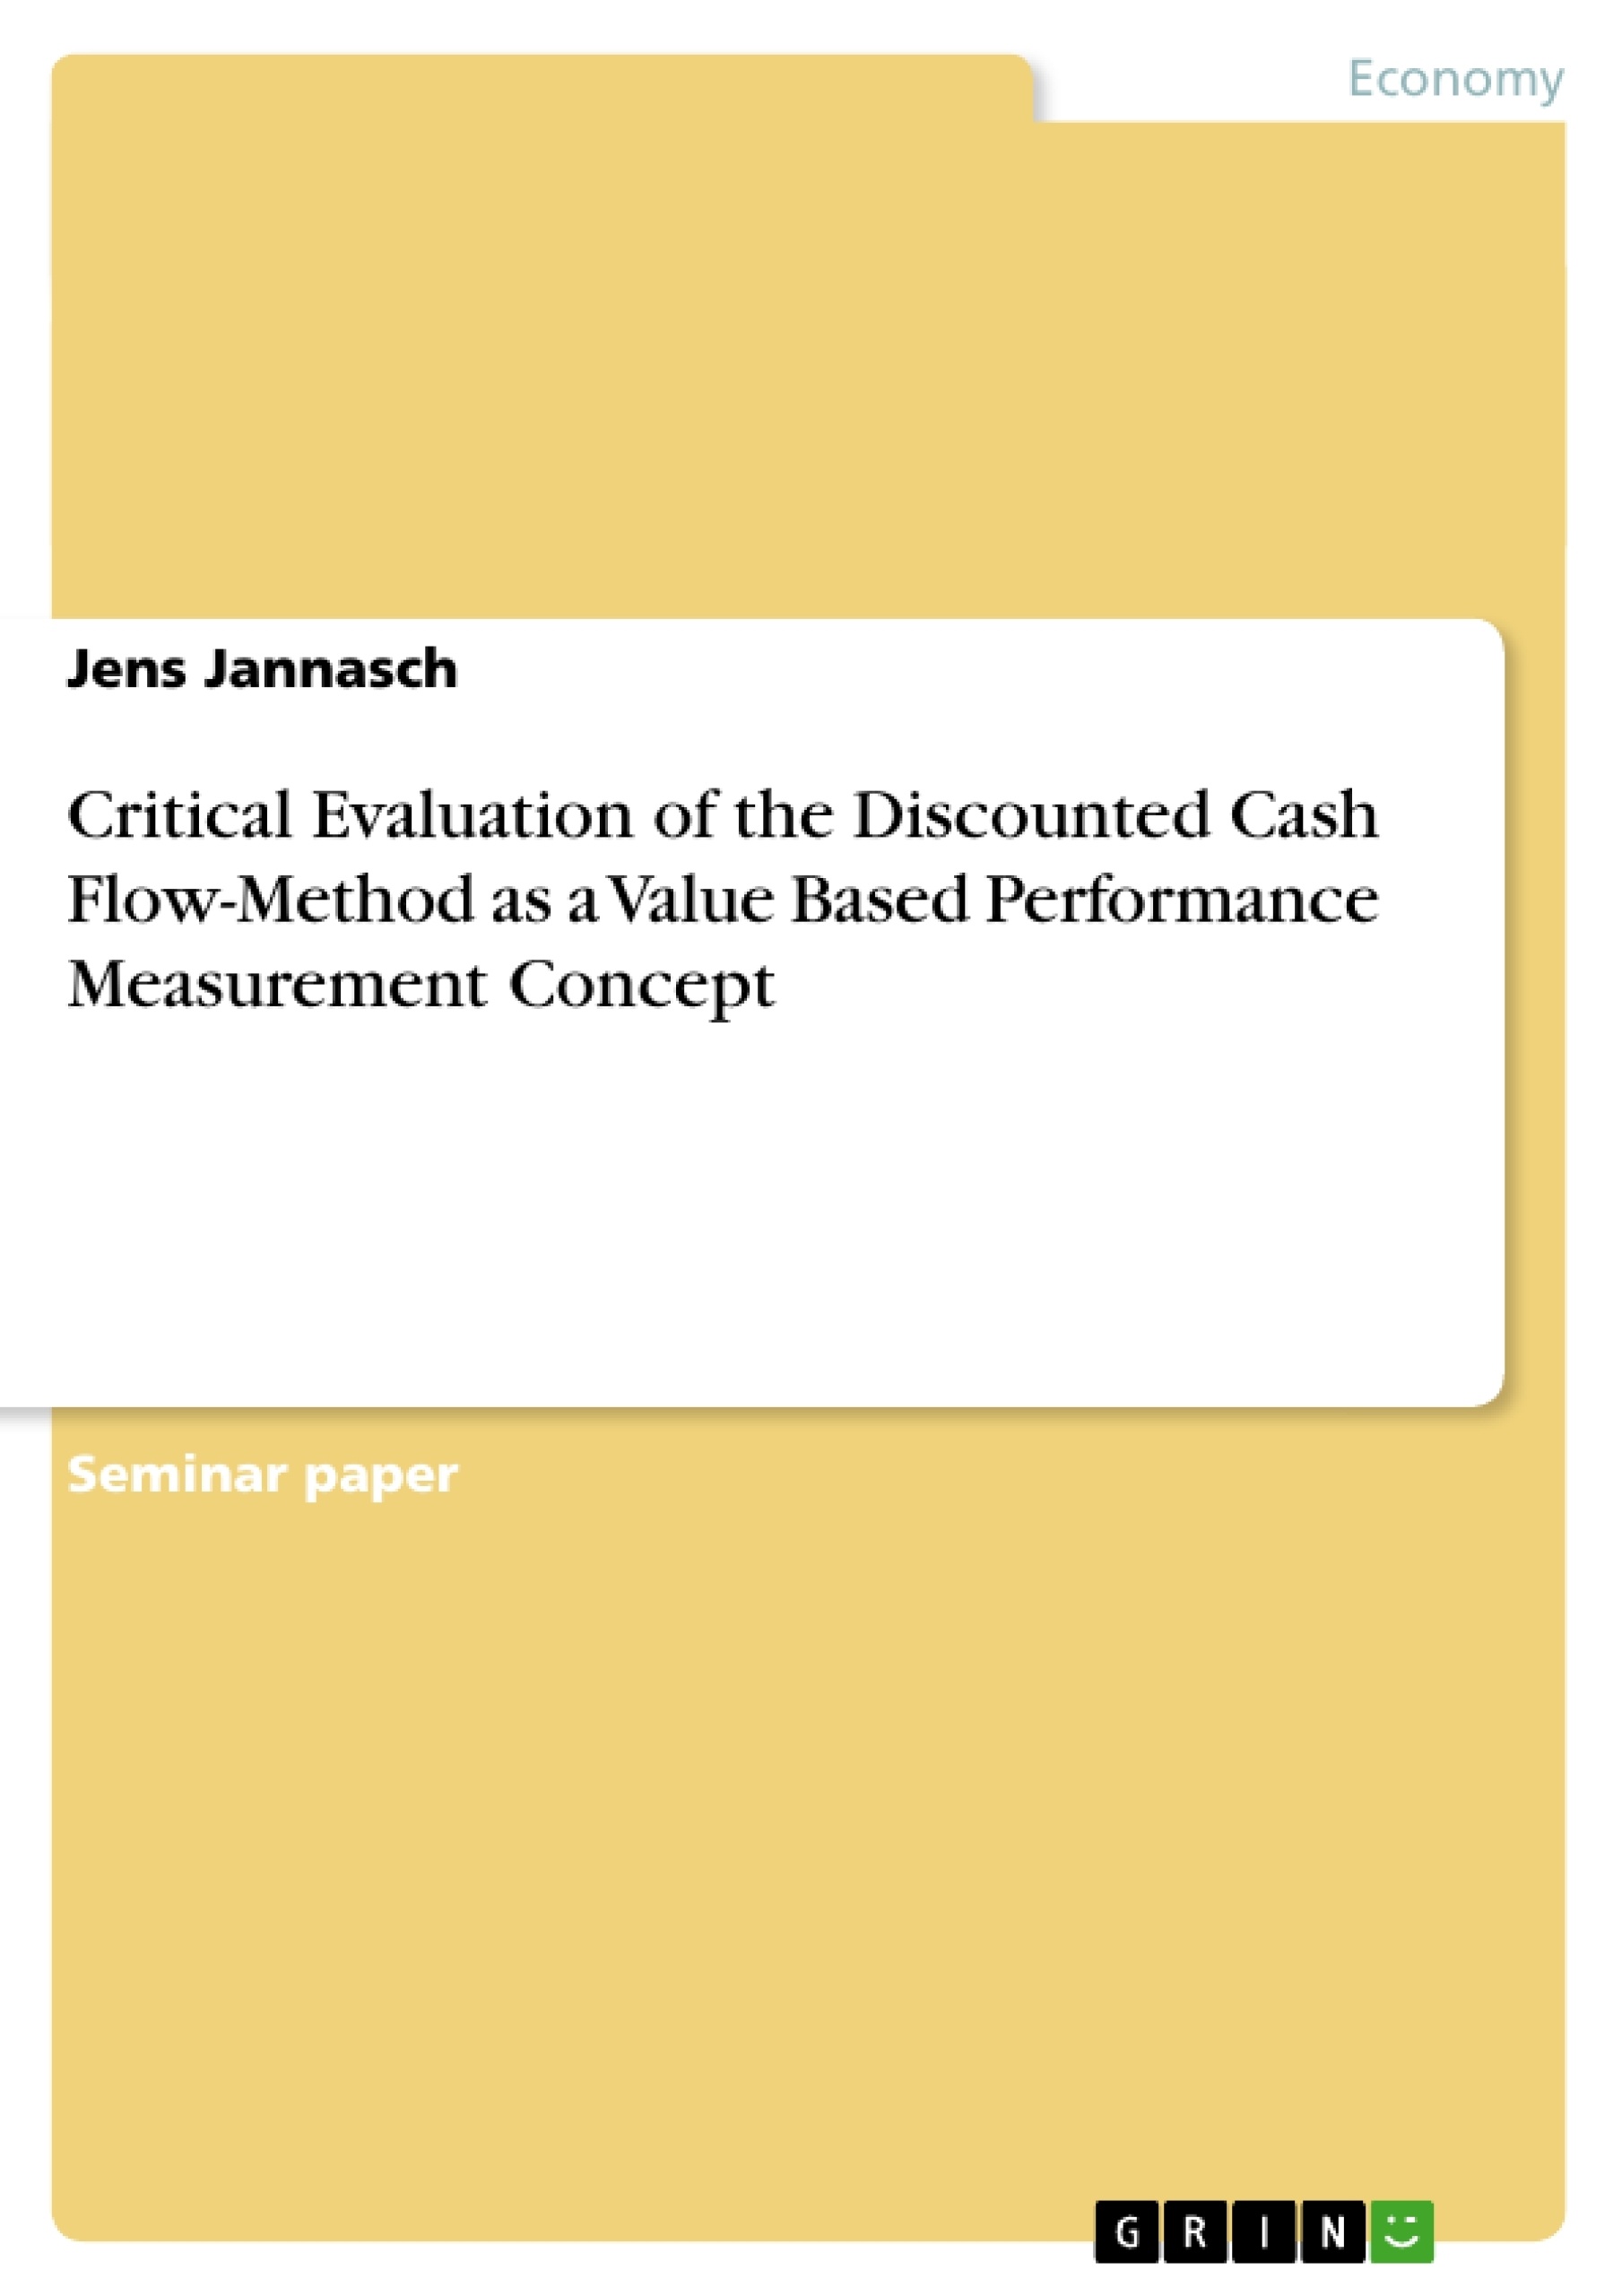 Title: Critical Evaluation of the Discounted Cash Flow-Method as a Value Based Performance Measurement Concept